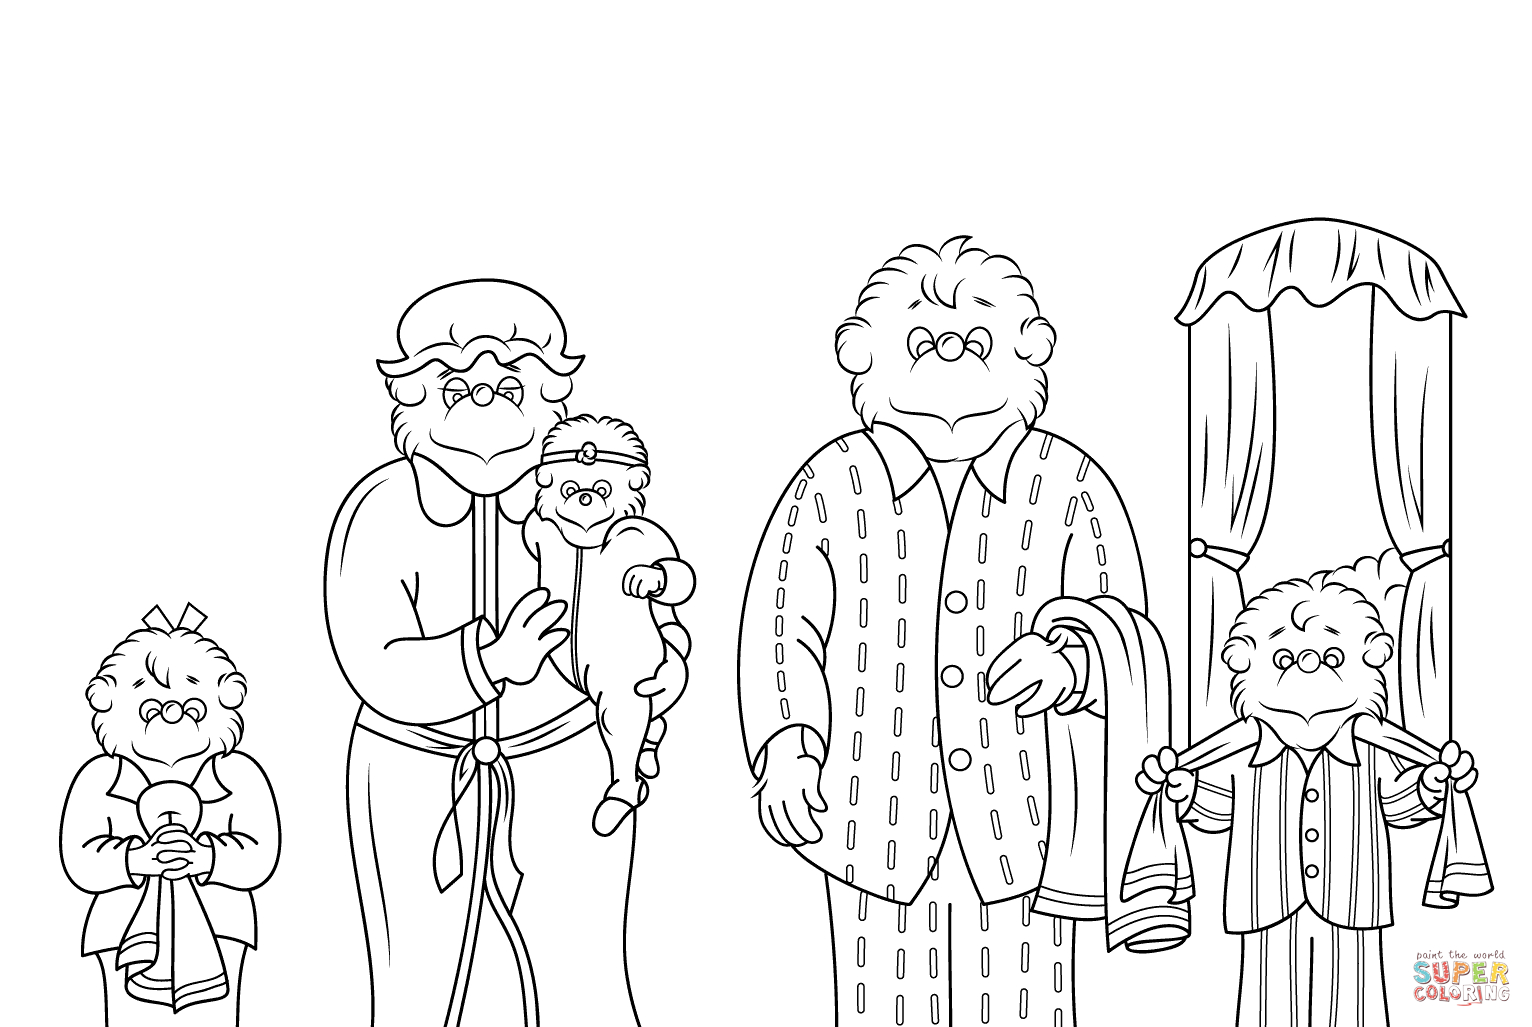 Berenstain Bears Coloring Pages Berenstain Bears Coloring Page Free Printable Coloring Pages